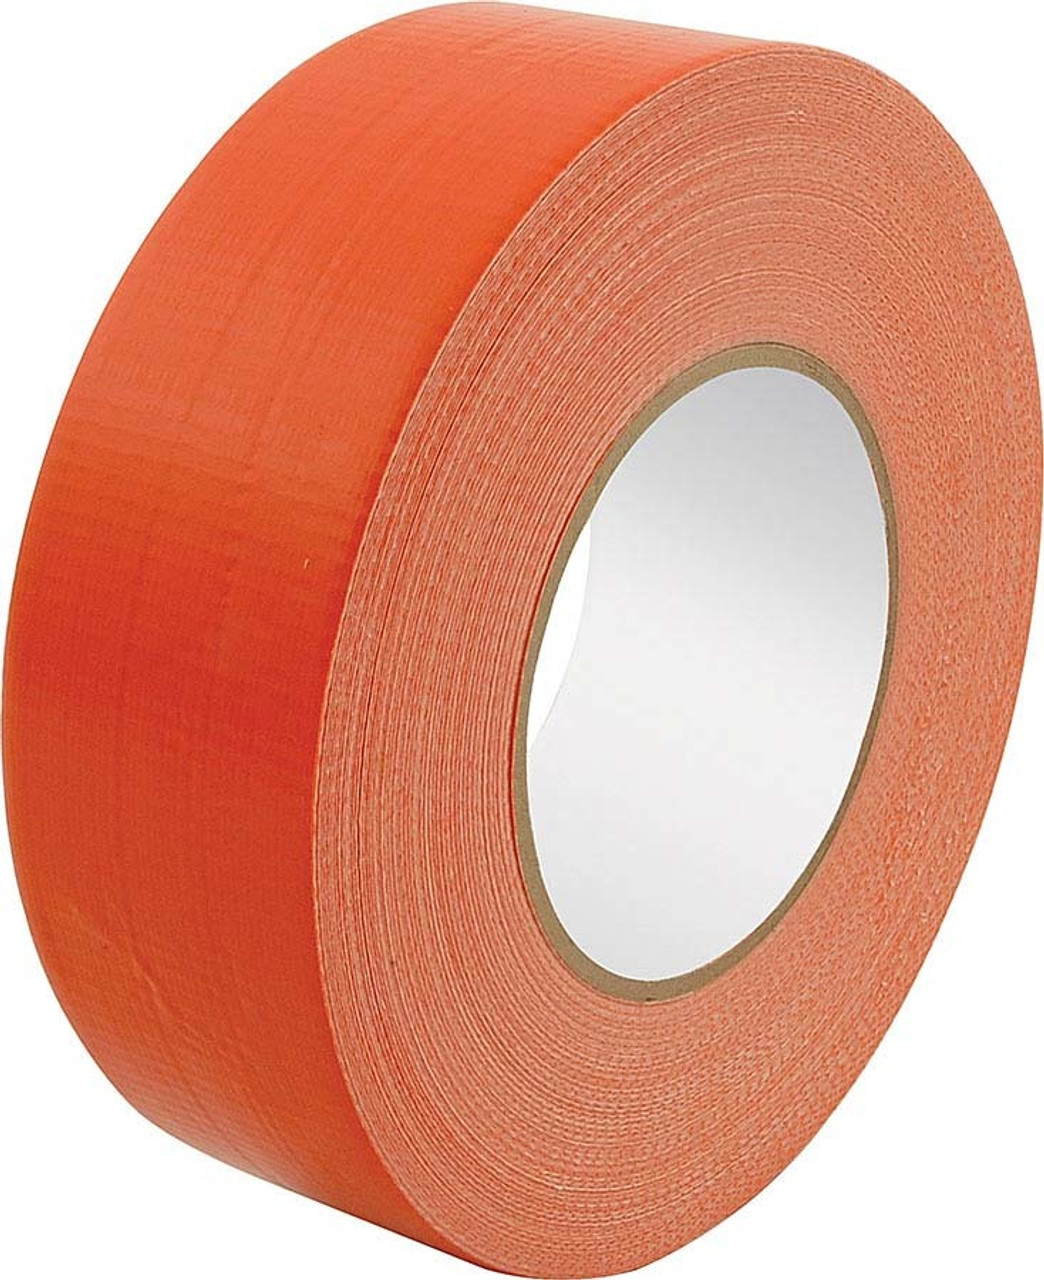 2" X 180' COLORED RACE TAPE